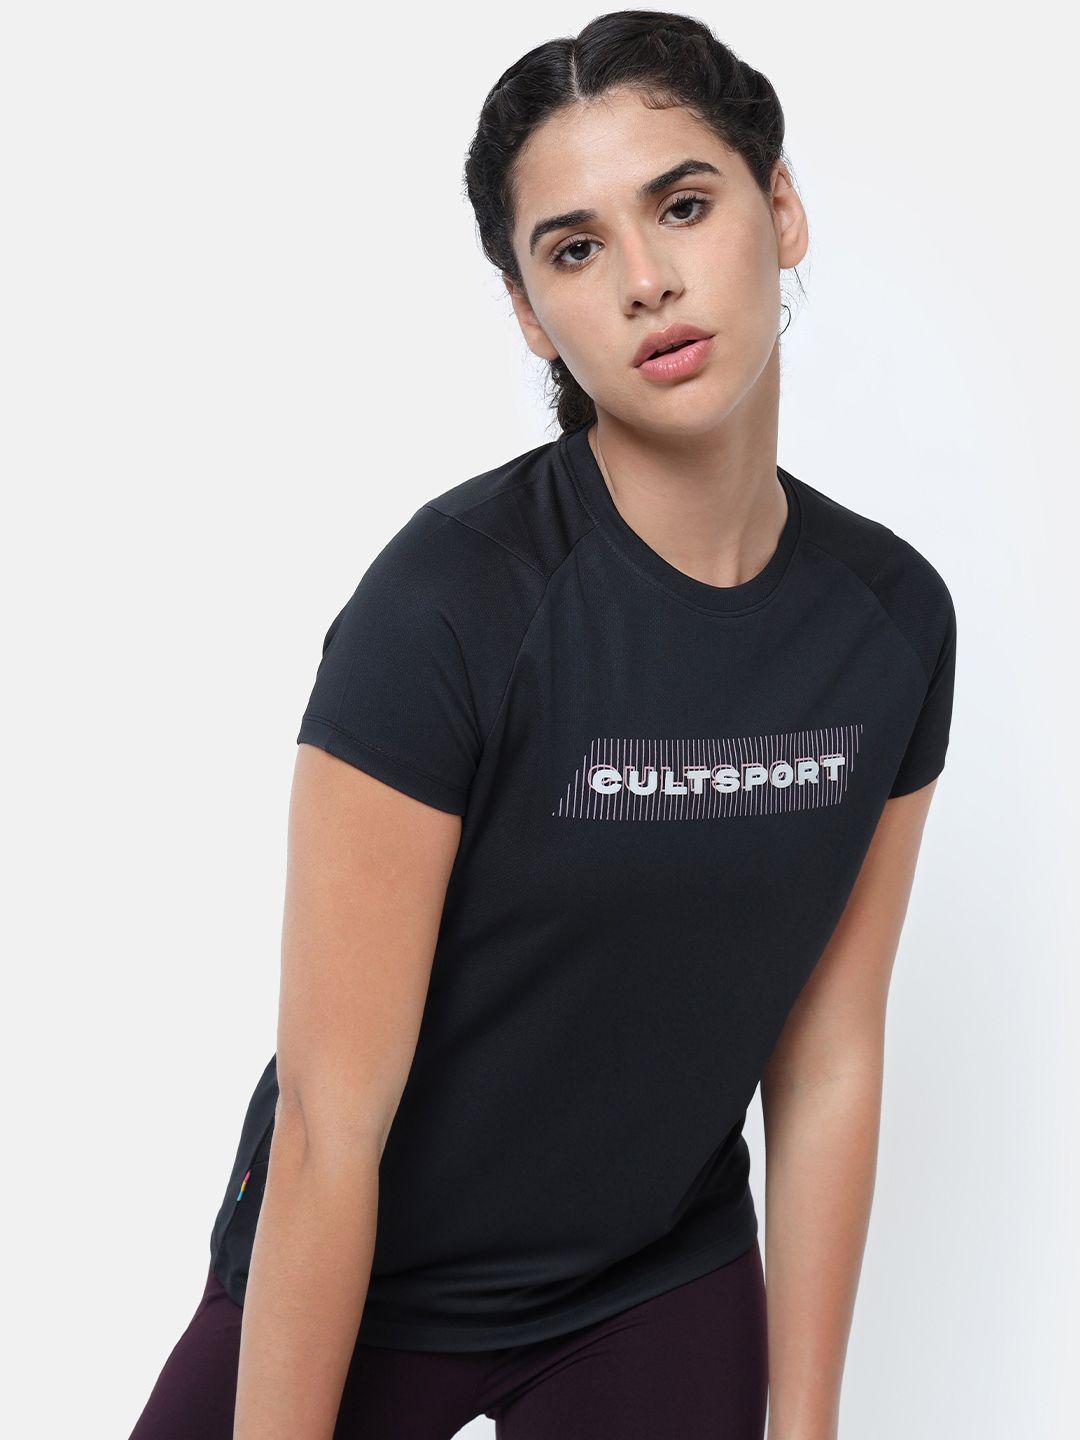 cultsport-typographic-printed-moisture-wicking-sports-t-shirt